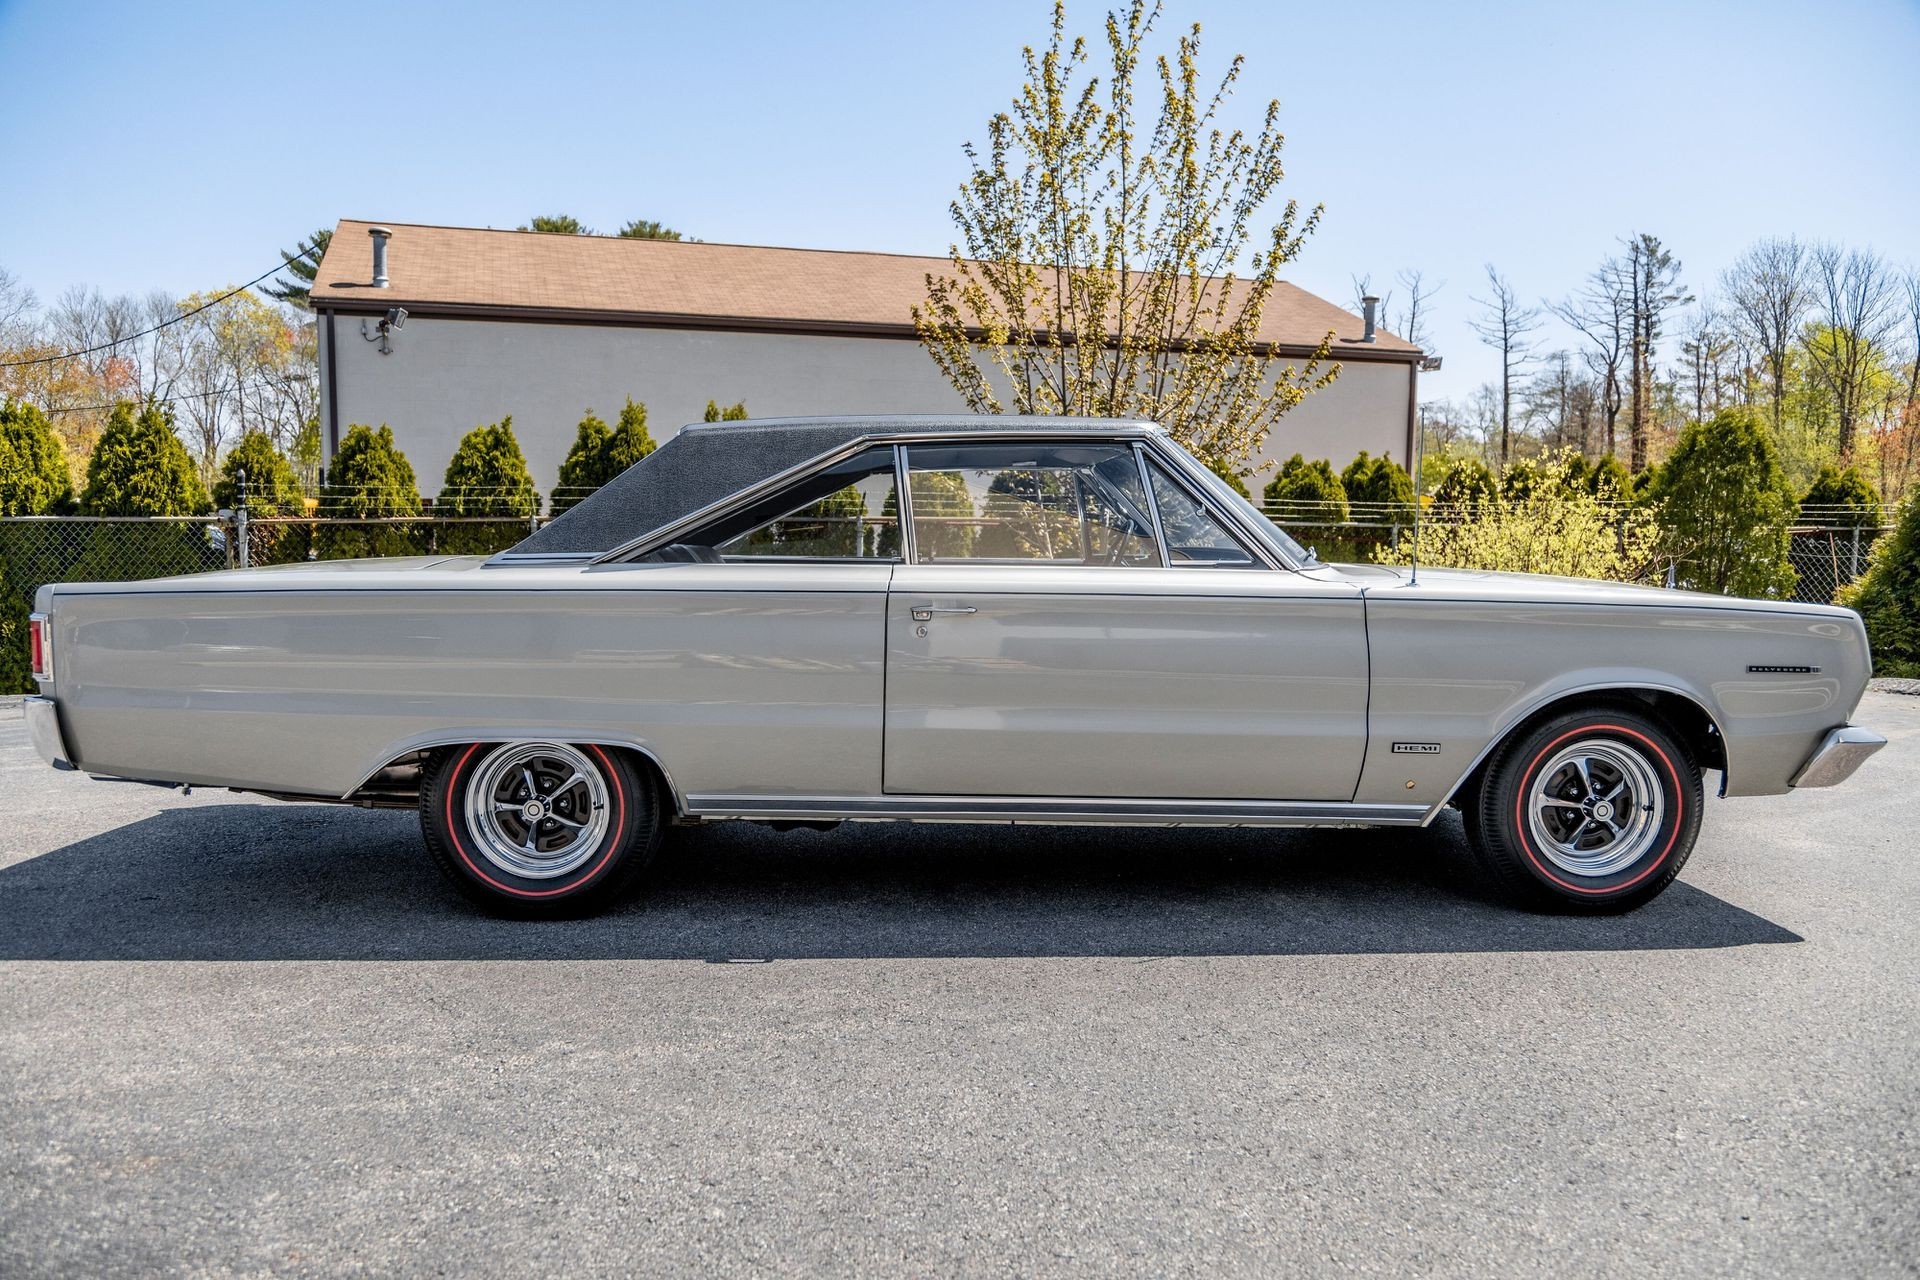 1967 Plymouth Belvedere II Values